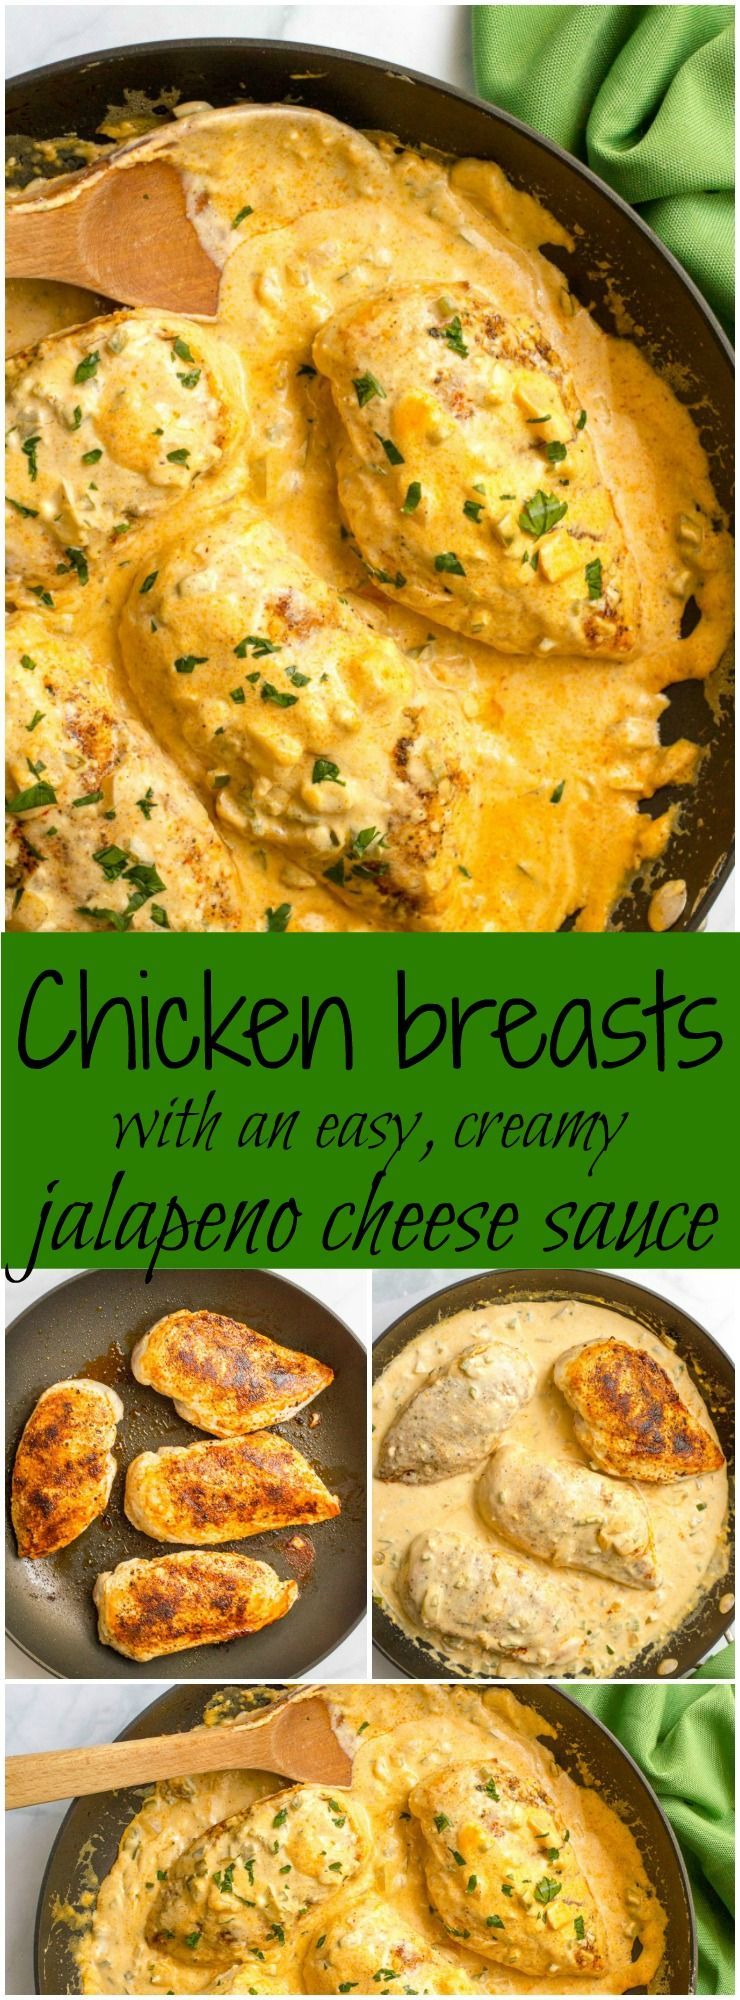 Chicken breasts with jalape?o cheese sauce -   23 cheesy chicken recipes
 ideas